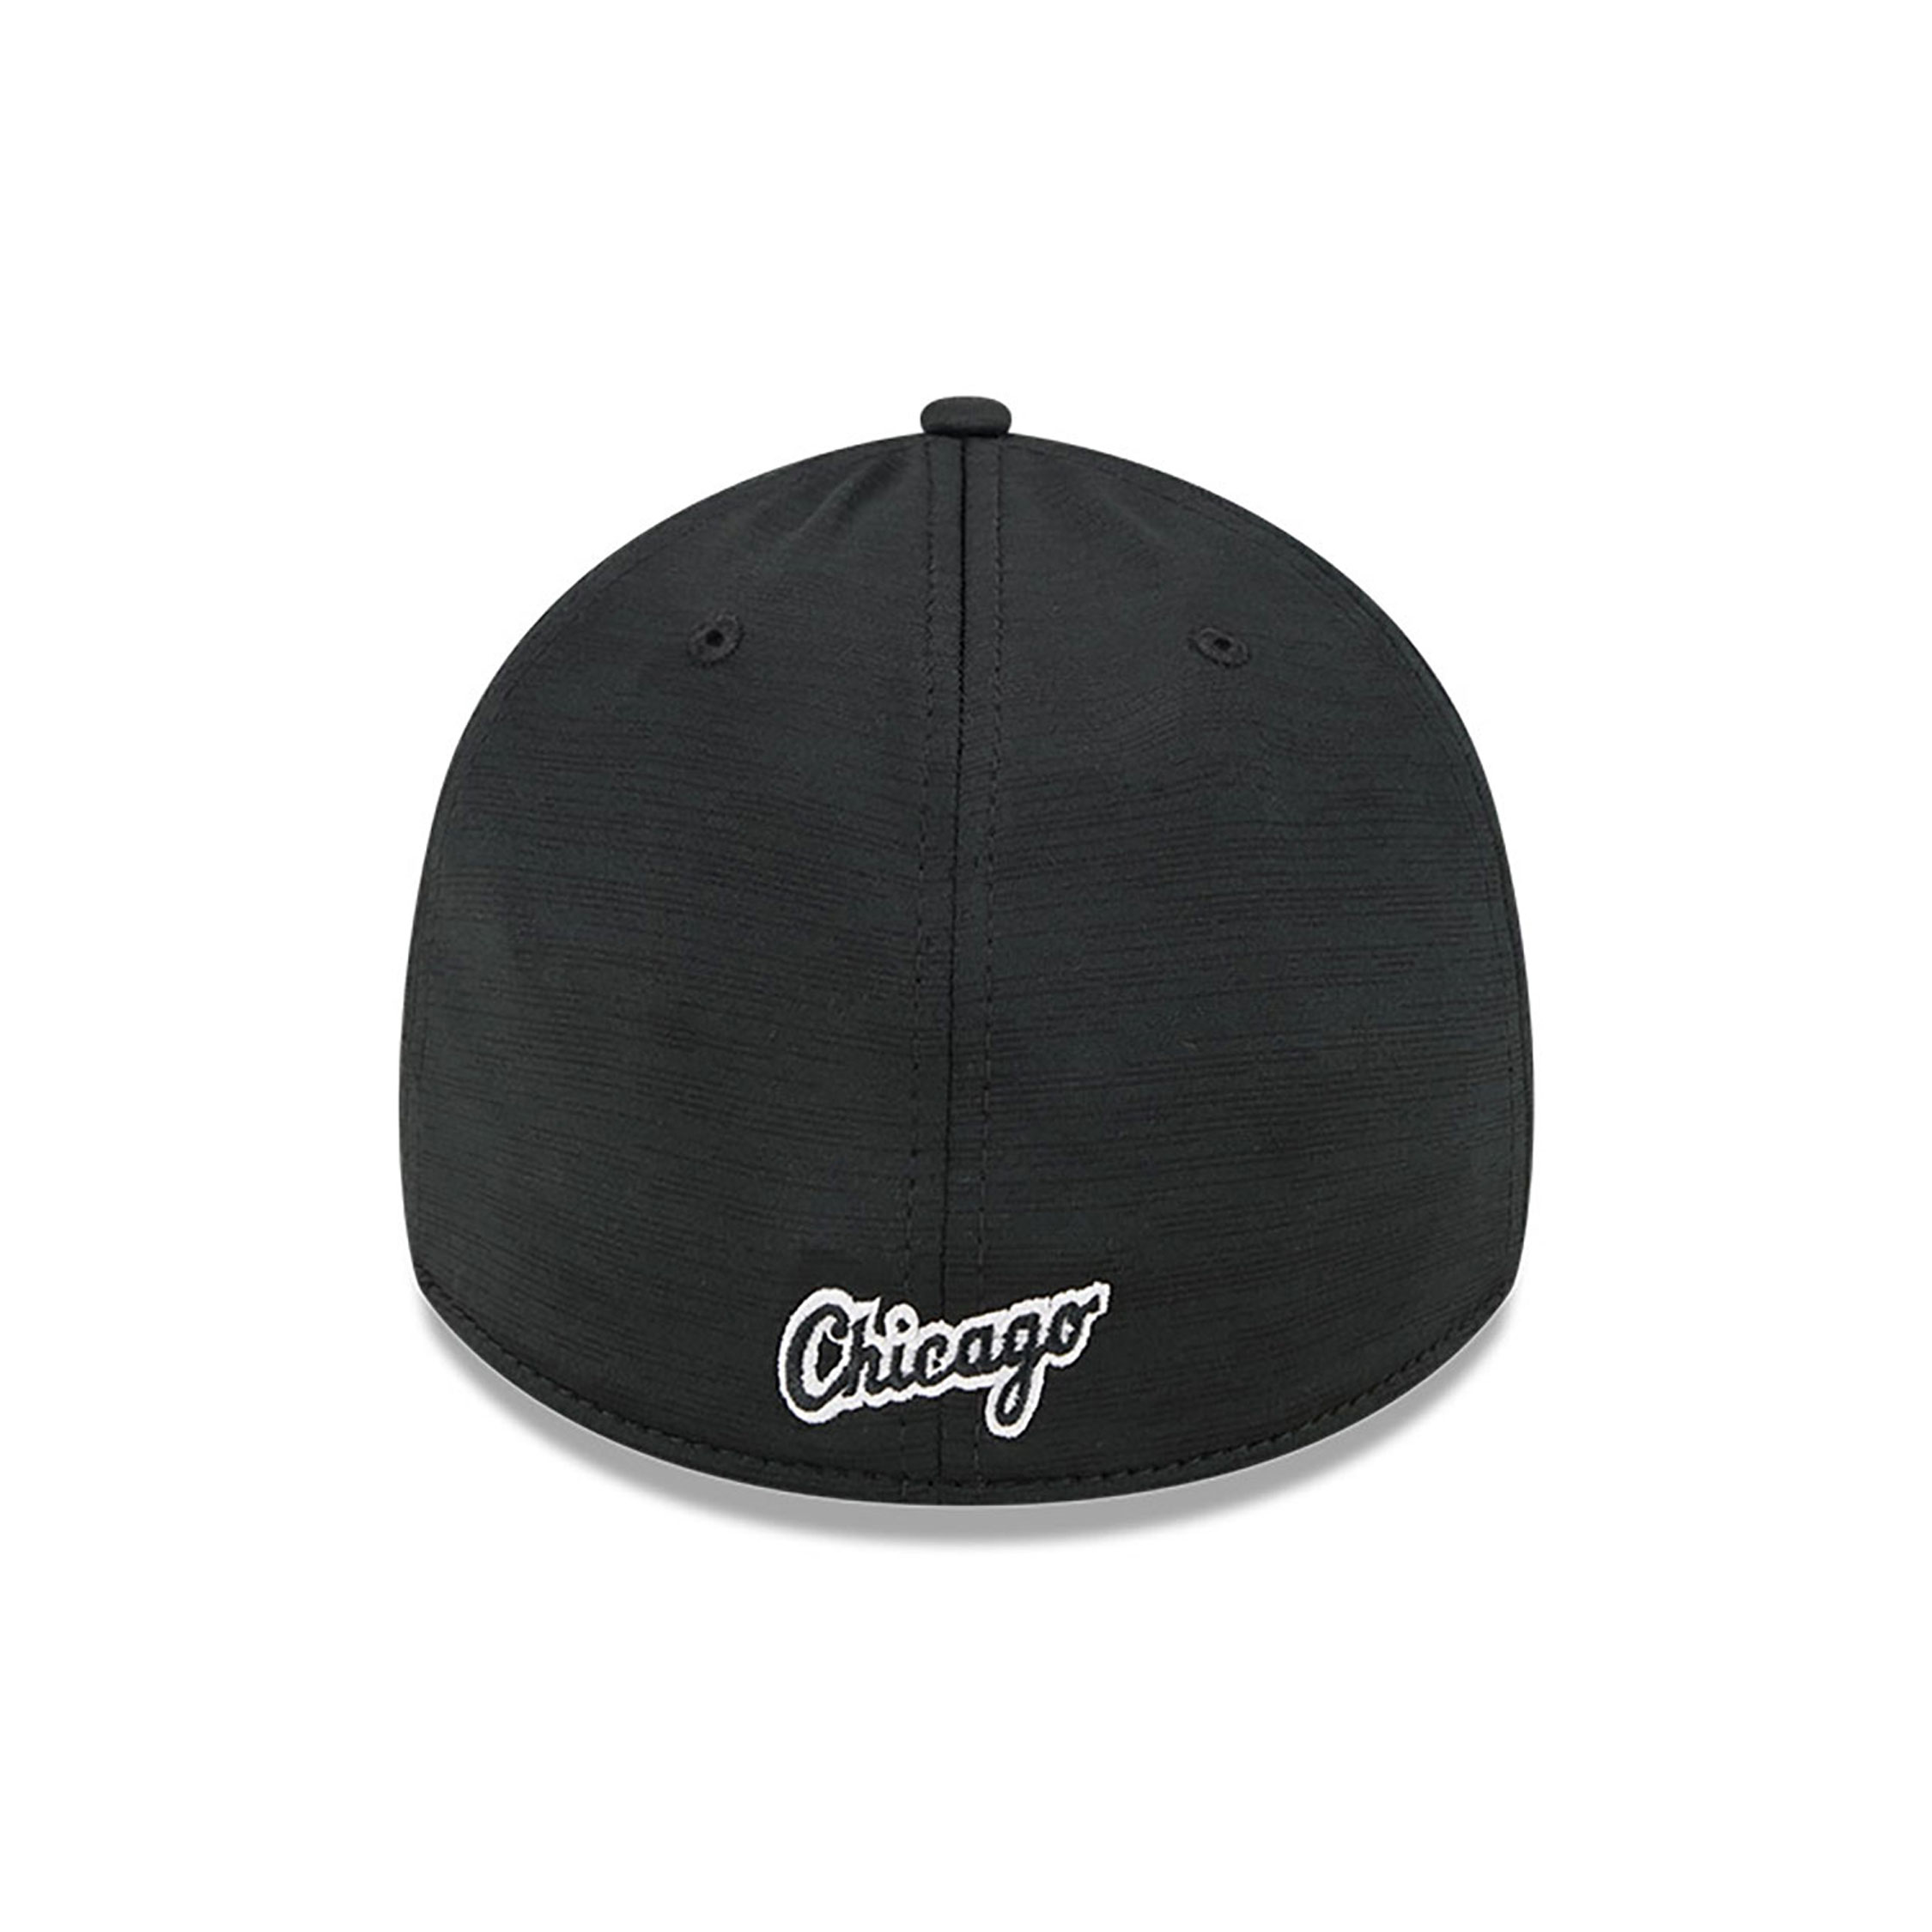 Chicago White Sox Clubhouse Black 39THIRTY Stretch Fit Cap